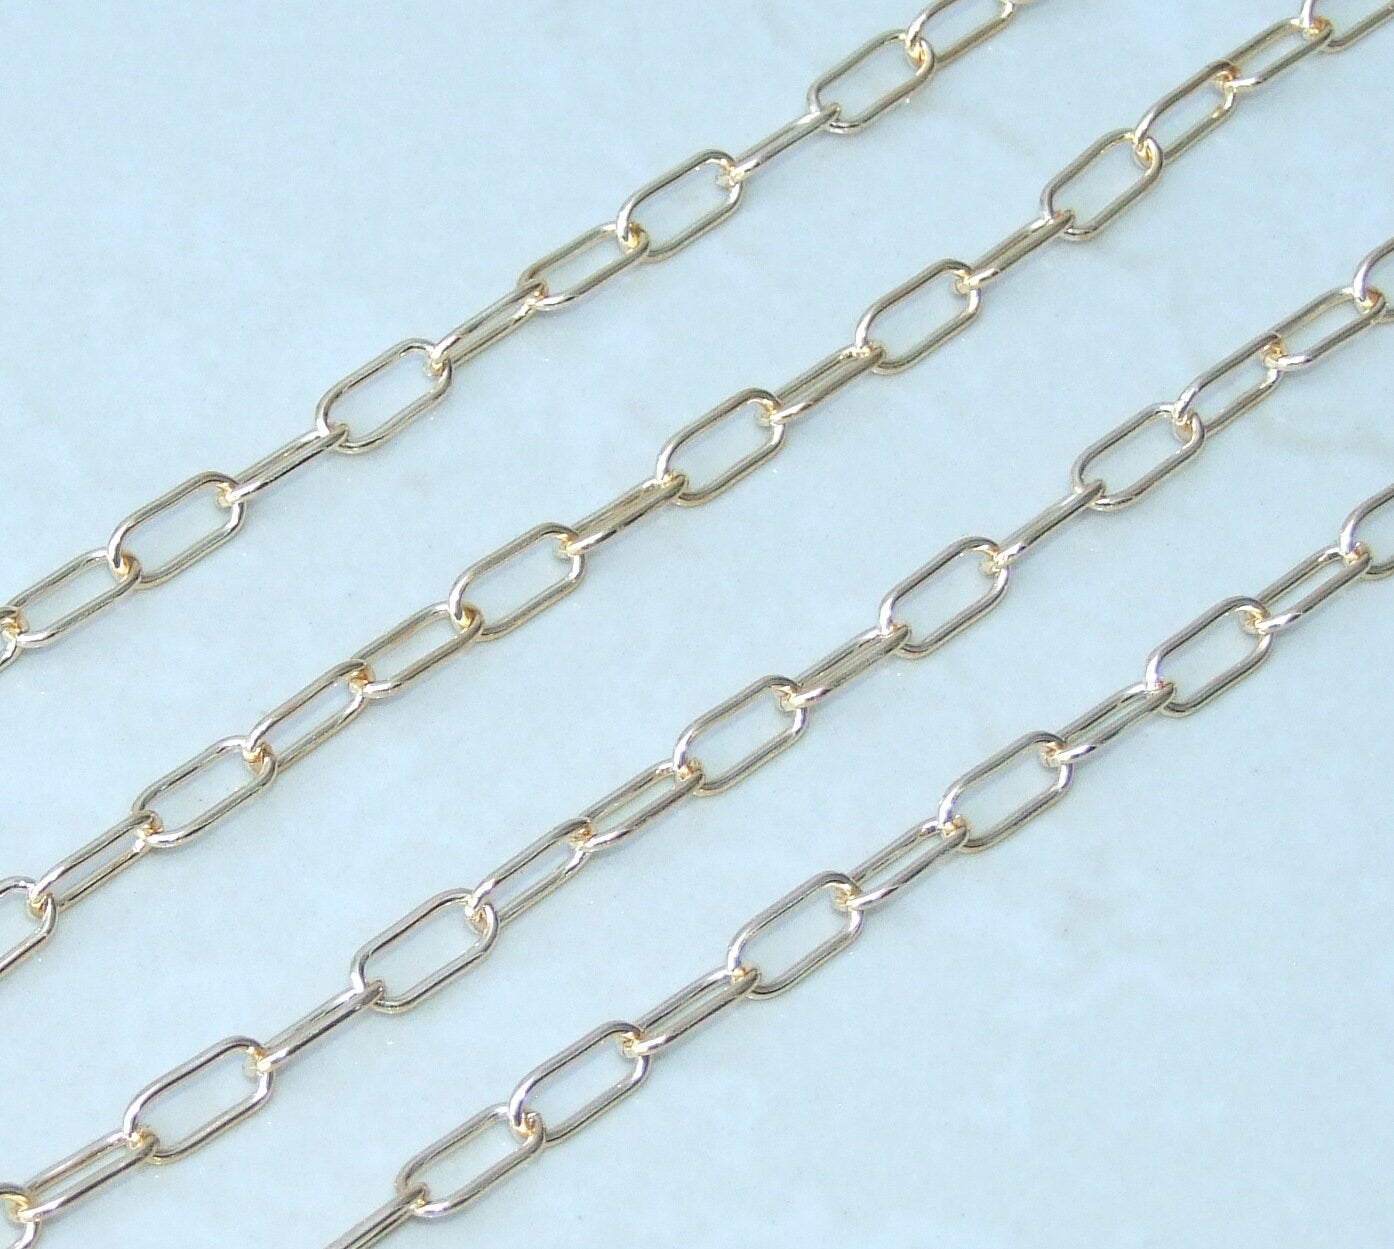 Paper Clip Chain, Oval C Link Cable Chain, Jewelry Chain, Necklace